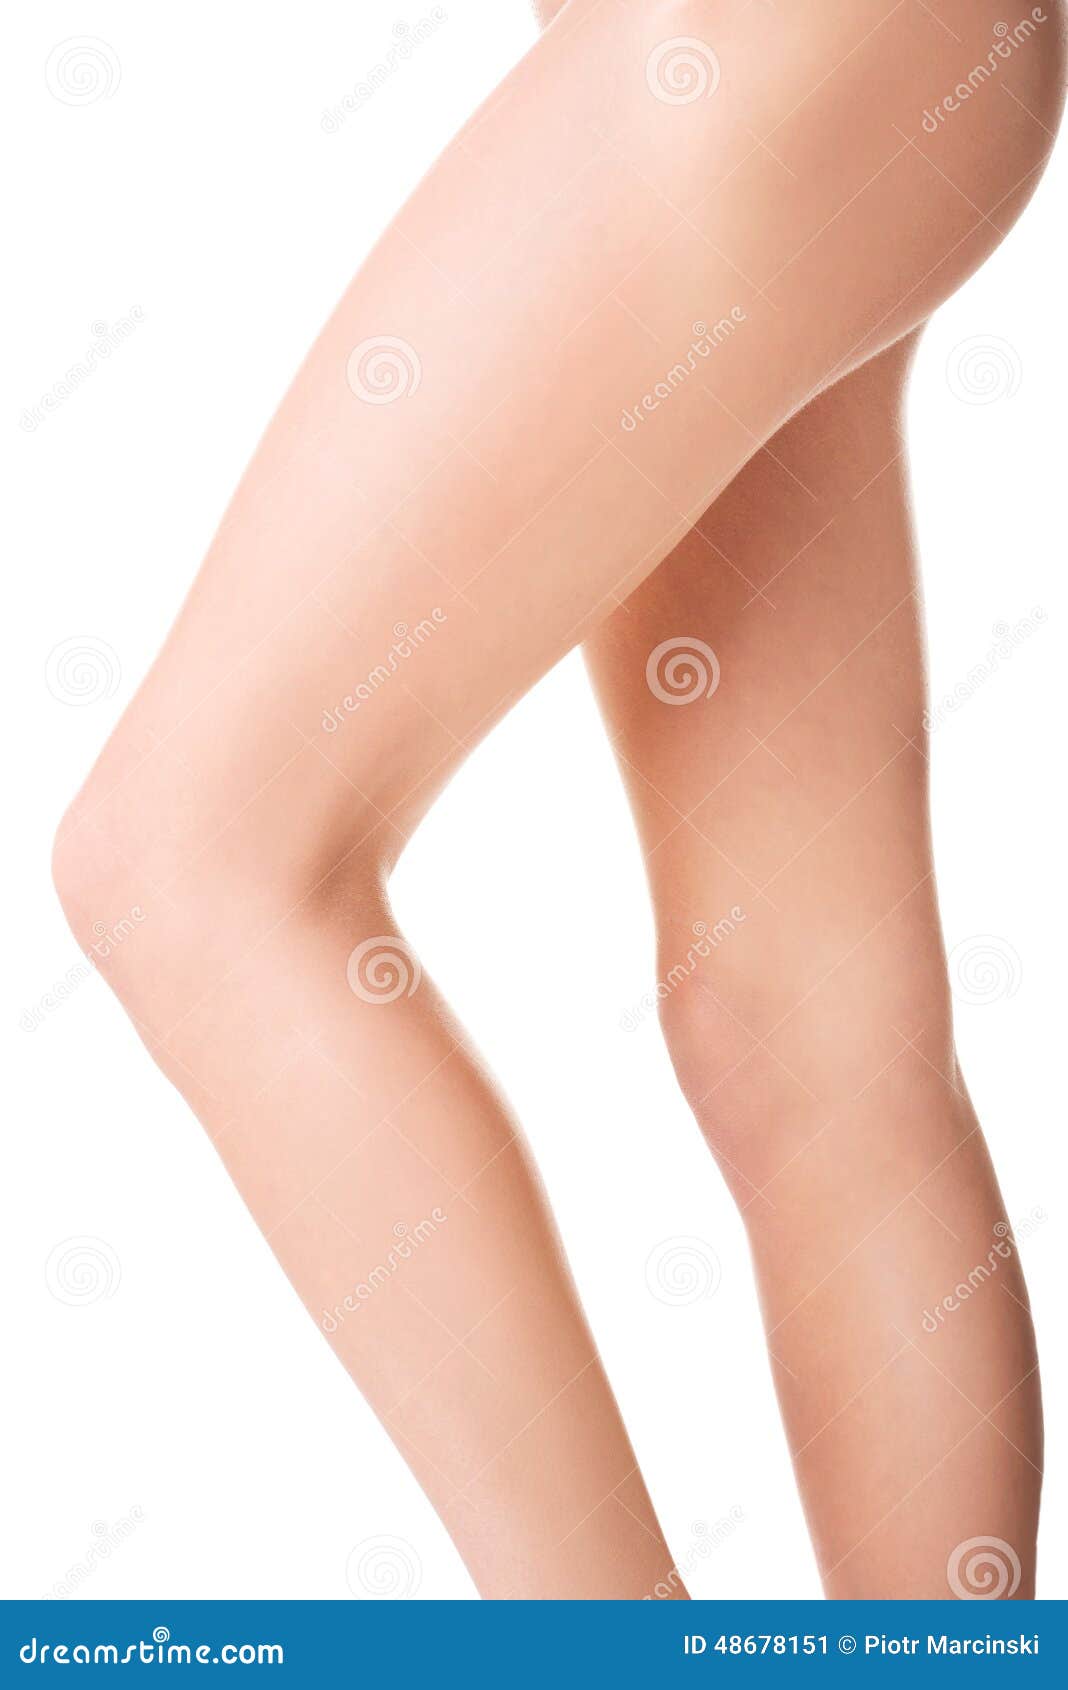 28744 Woman Legs Side View Images, Stock Photos &